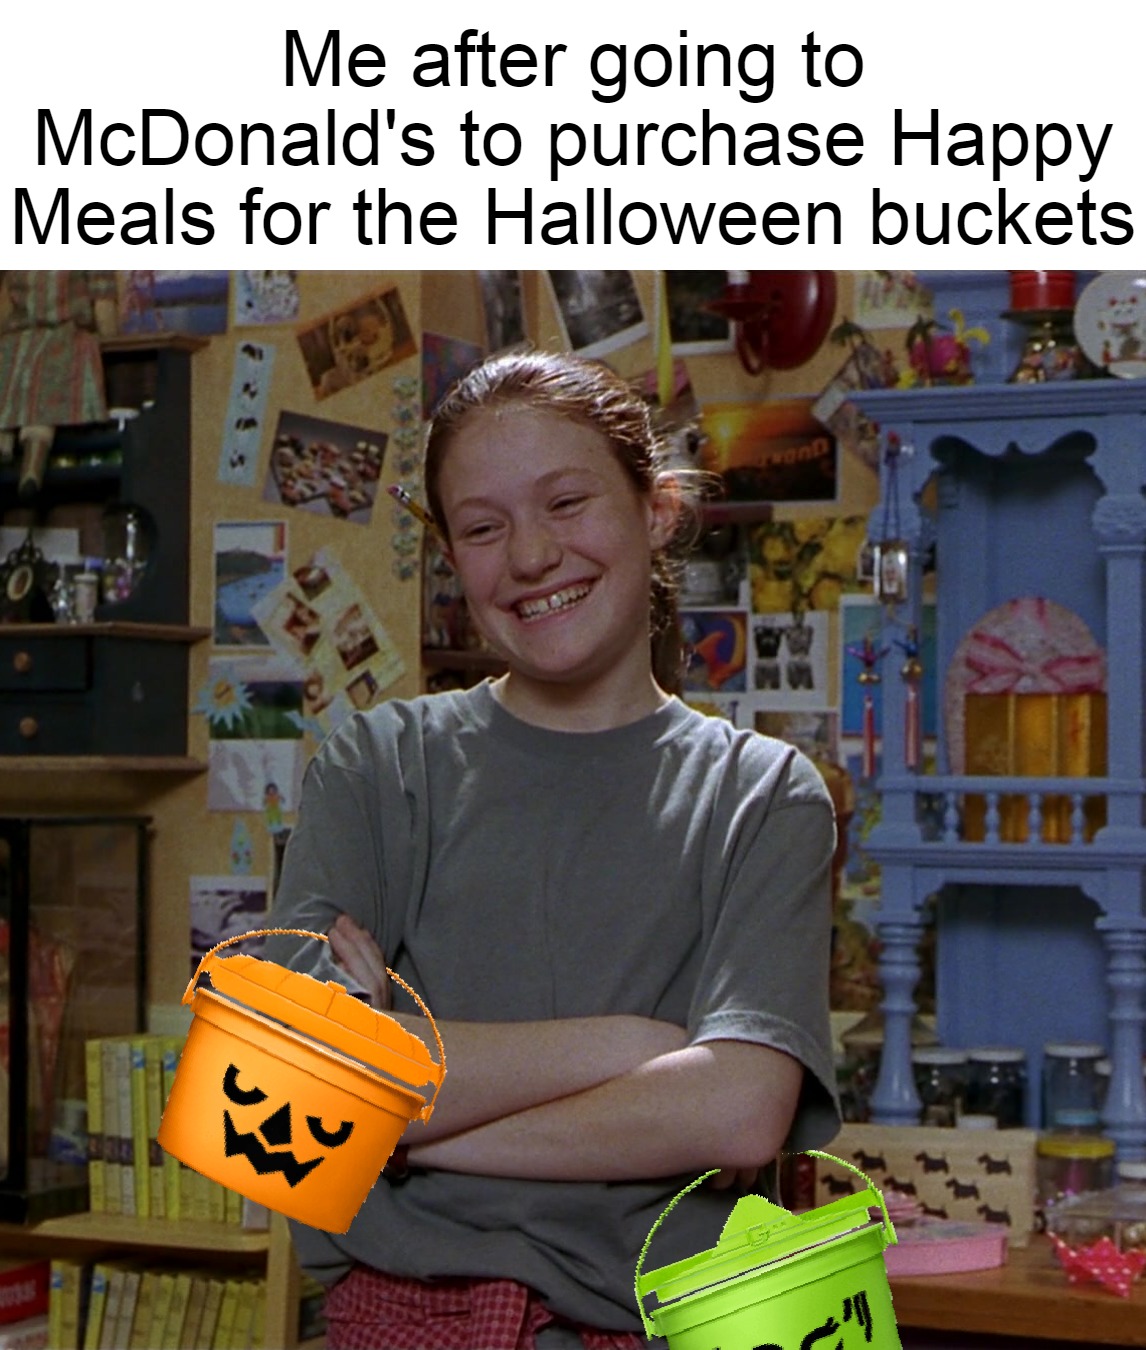 Kristy Smiling with Folded Arms | Me after going to McDonald's to purchase Happy Meals for the Halloween buckets | image tagged in kristy smiling with folded arms,meme,memes,funny,mcdonalds,halloween | made w/ Imgflip meme maker